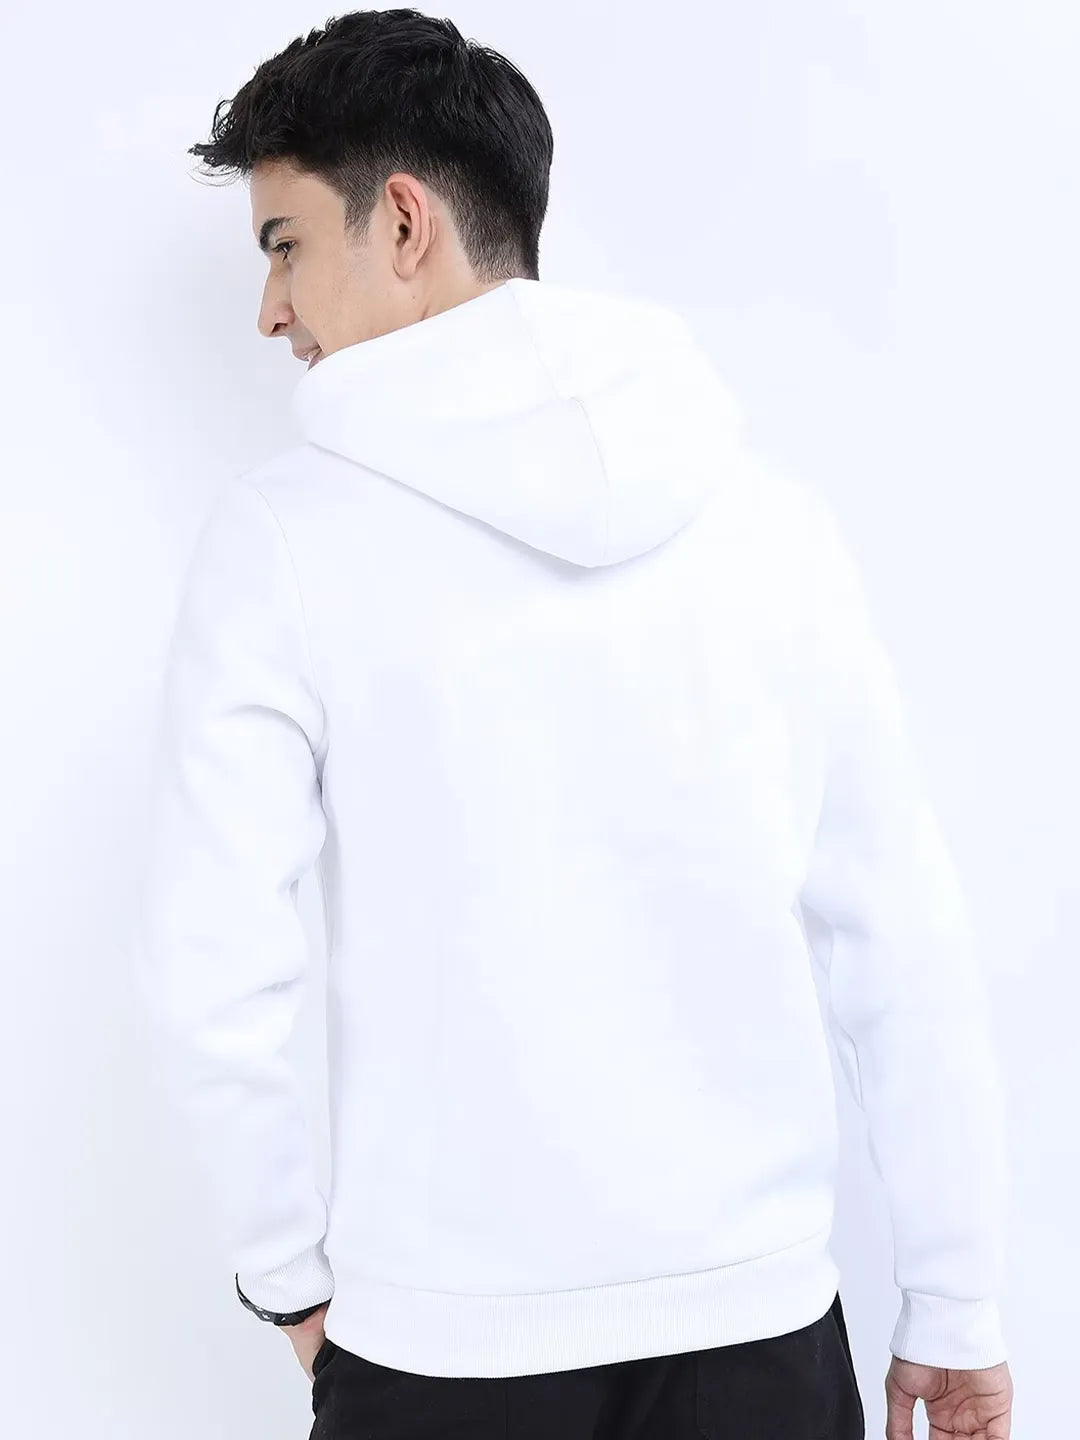 Unisex For Men and Women Hoodie White Color Full Sleeves